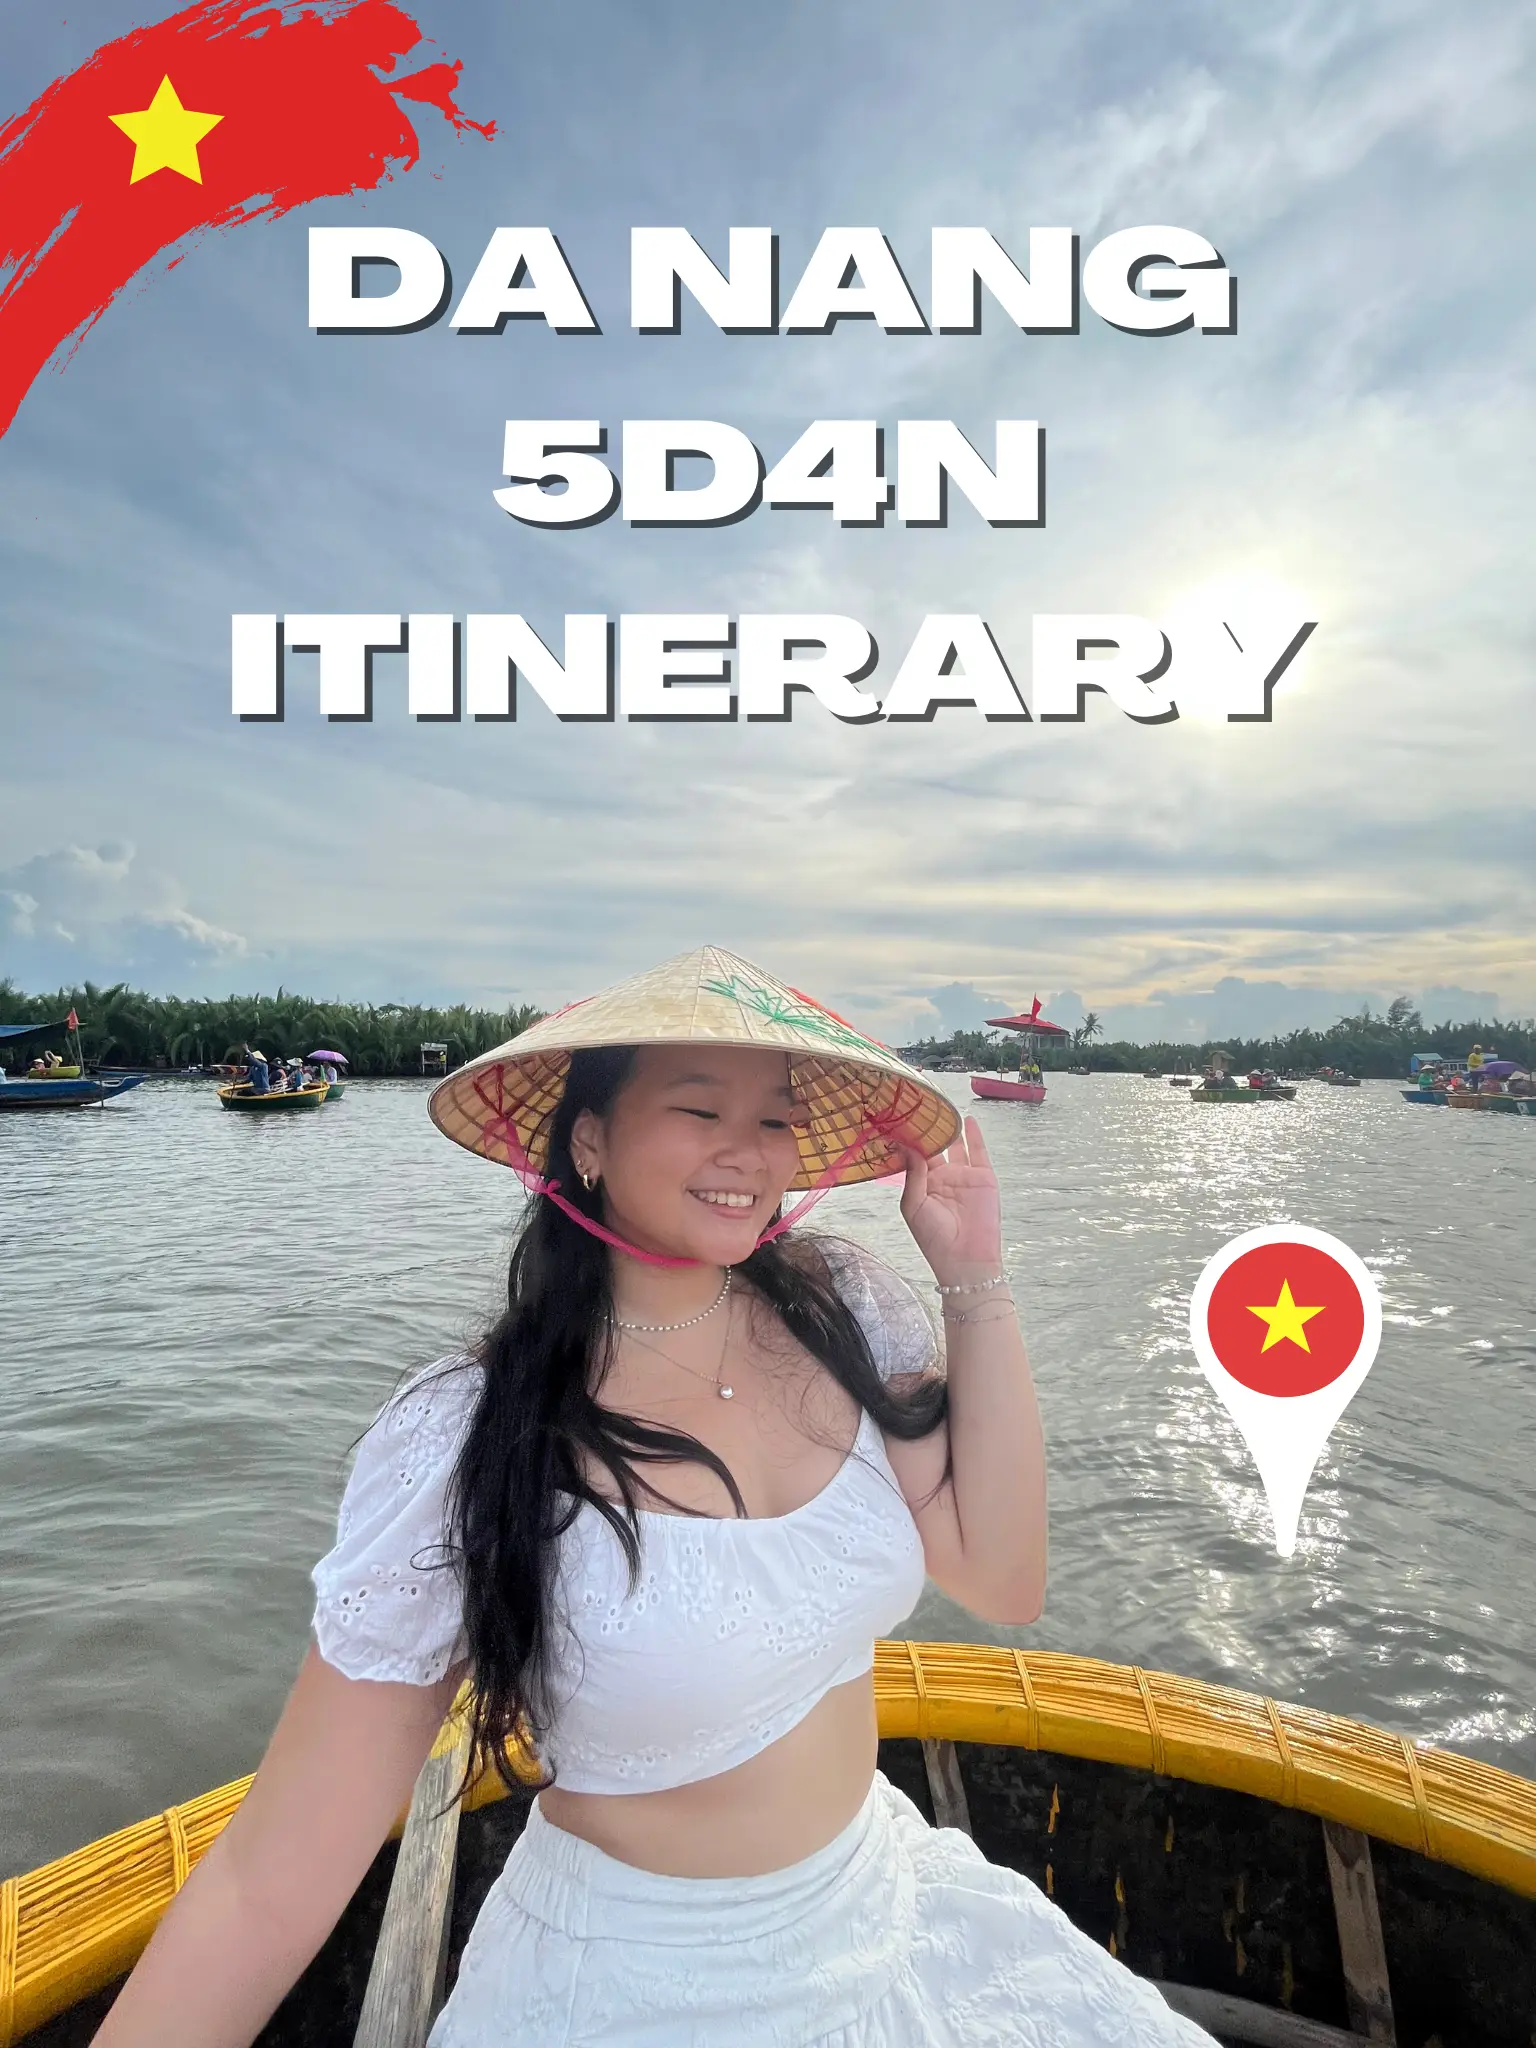 planning yr da nang itinerary so u don’t have to🇻🇳's images(0)